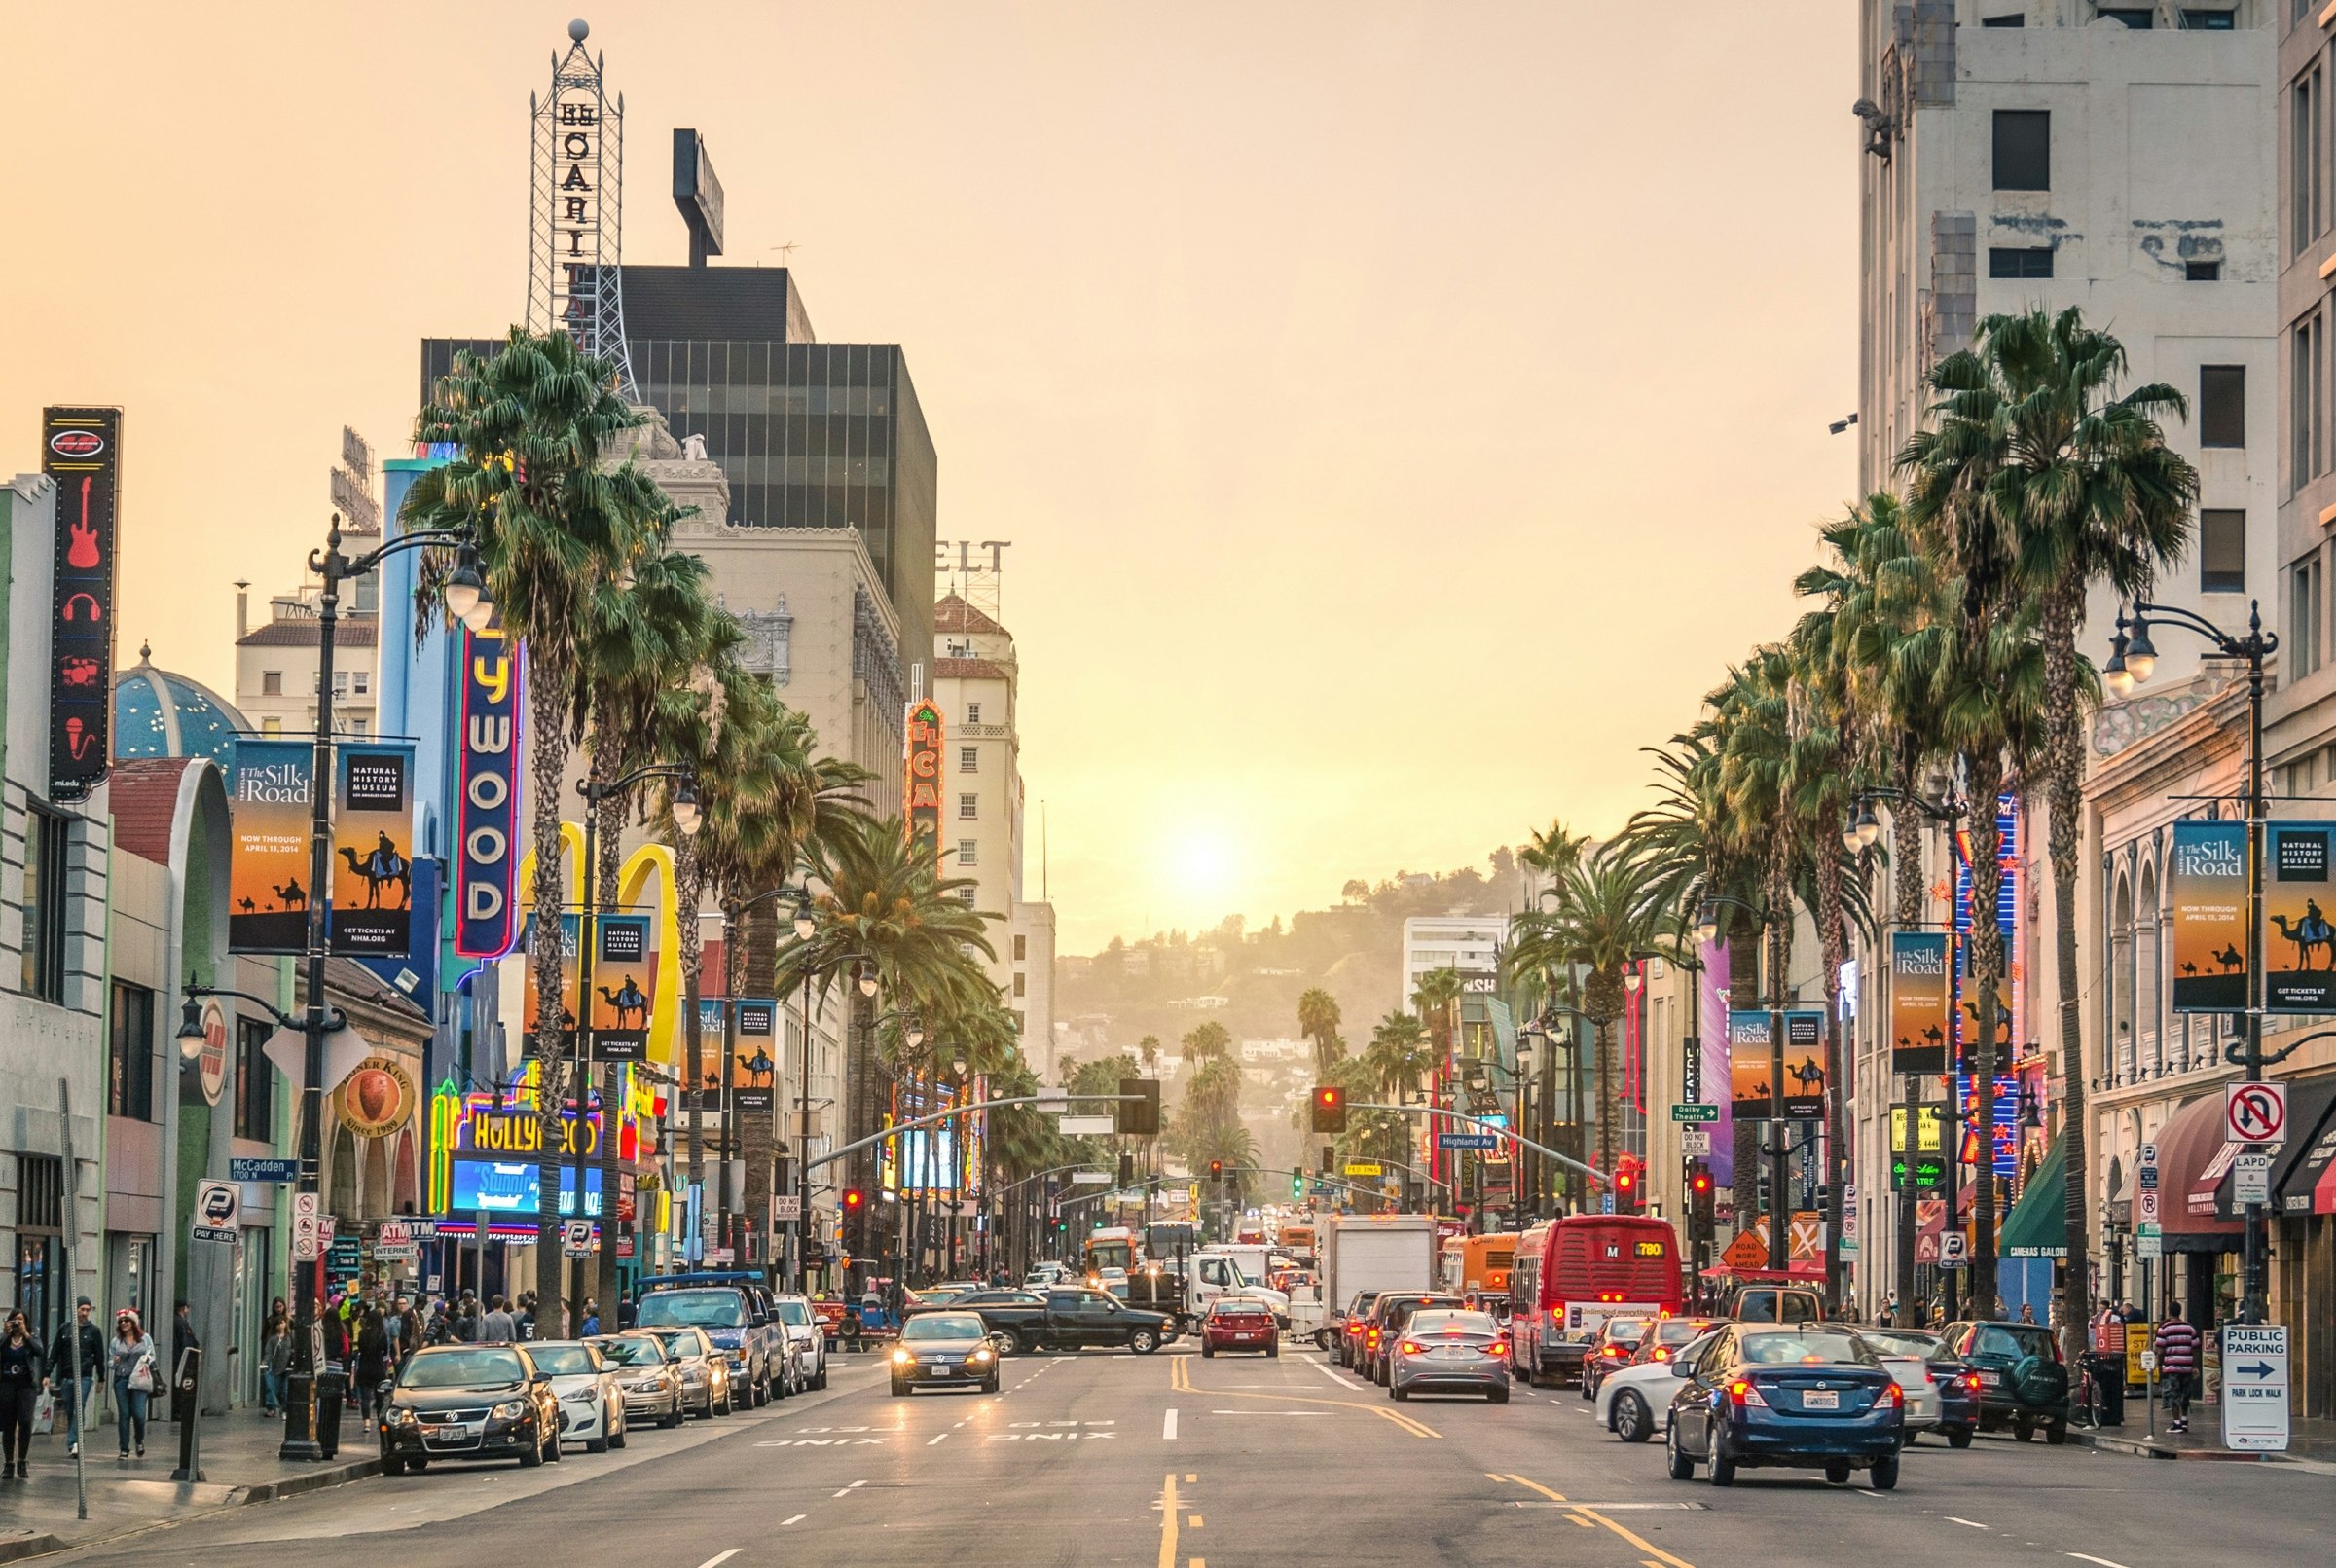 View of Los Angeles’s Hollywood Boulevard at sunset. In 1958, the Hollywood Walk of Fame was created on this street as a tribute to artists working in the entertainment industry. 